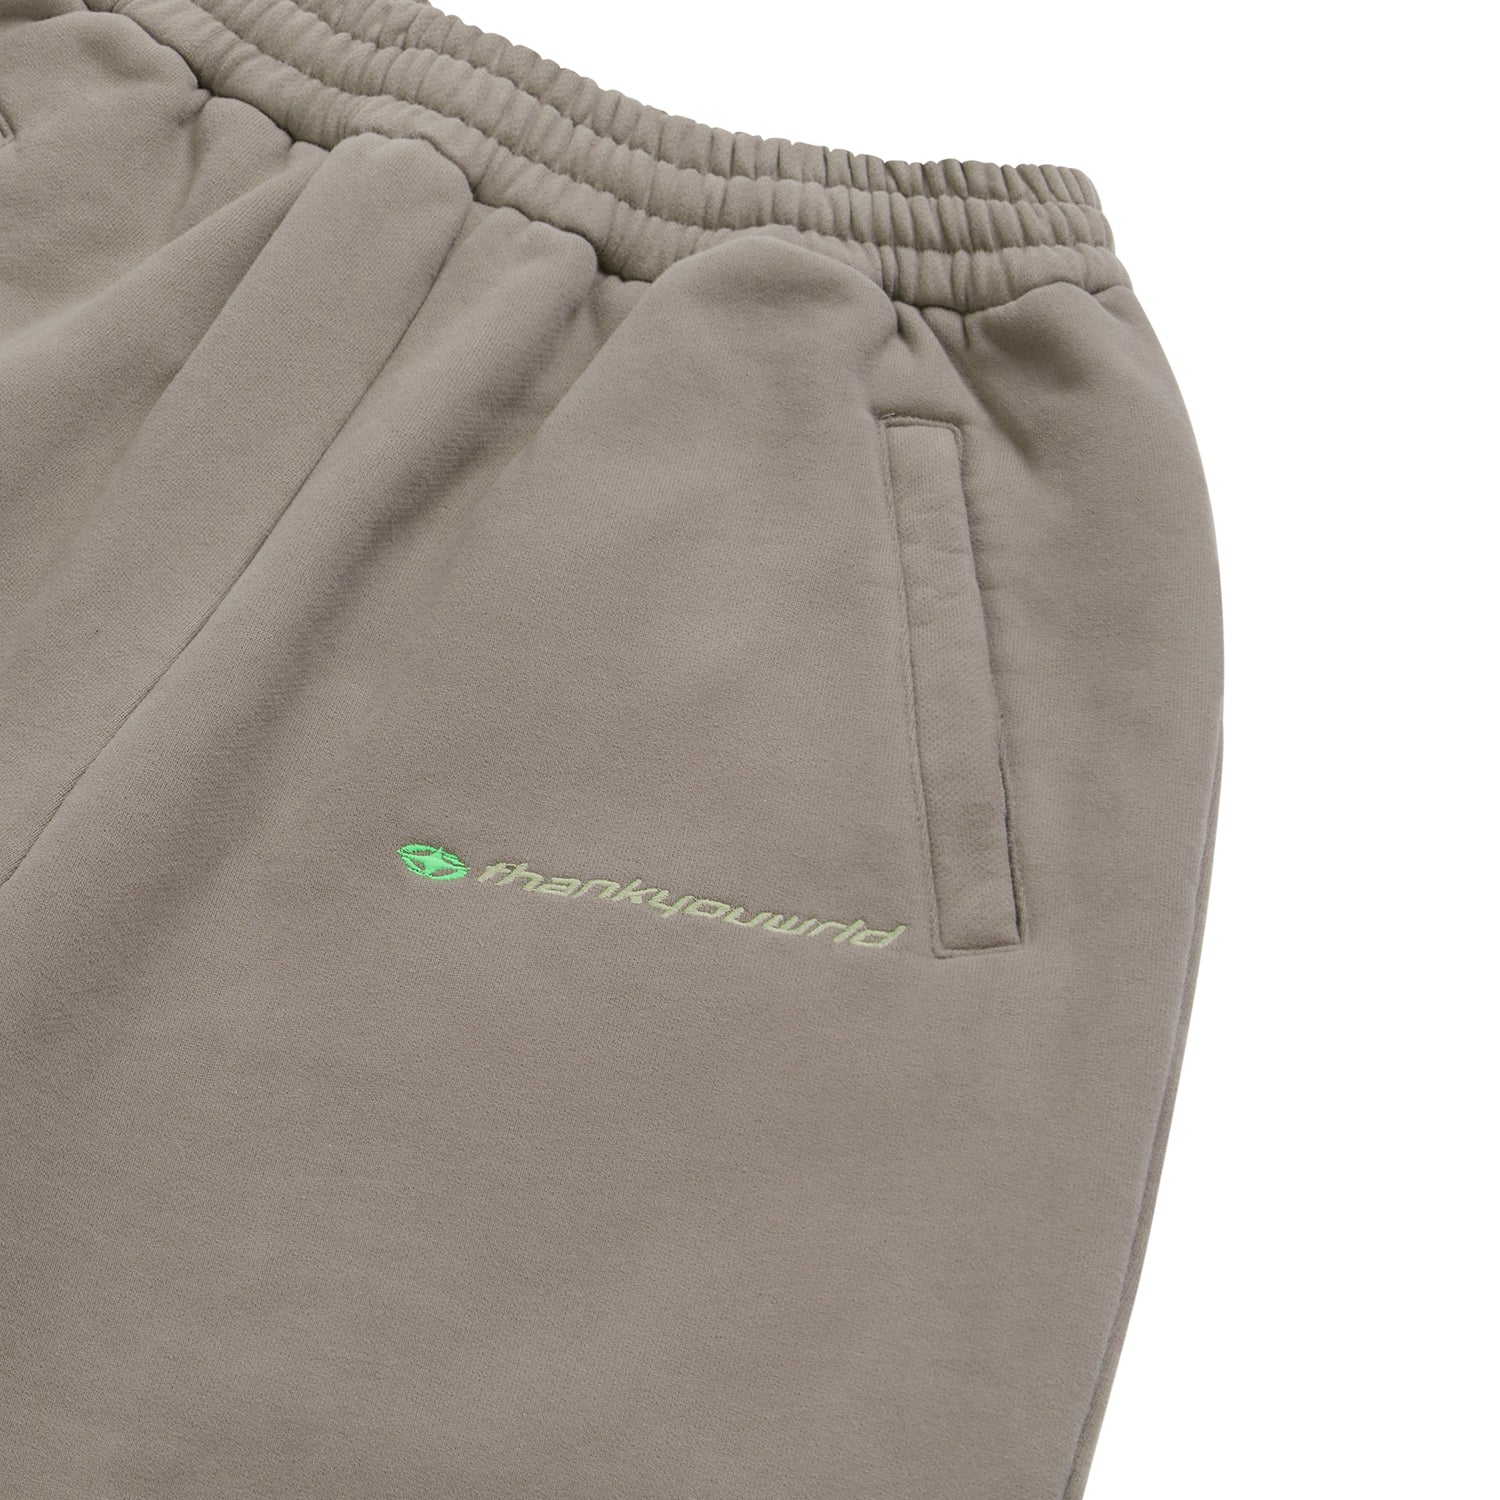 EMBROIDERED LOGO SWEATPANTS STORM